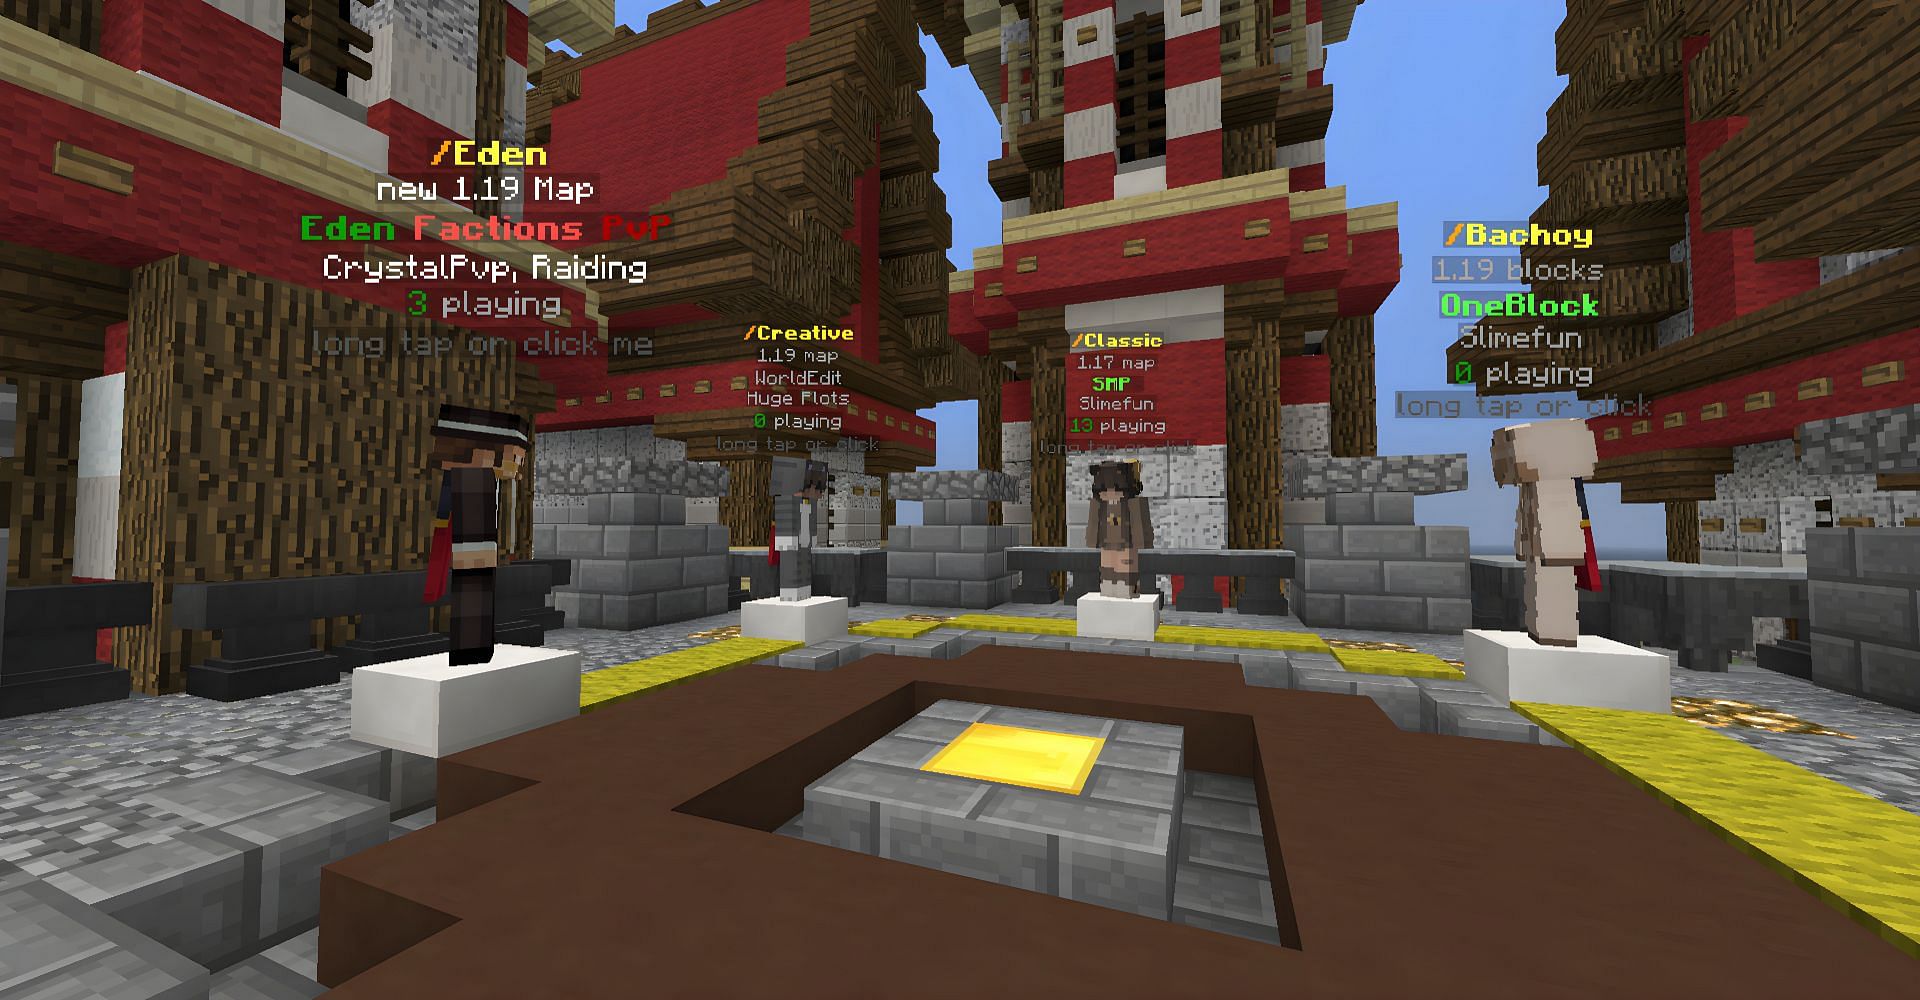 ChocoHills is an extremely friendly server (Image via Mojang)